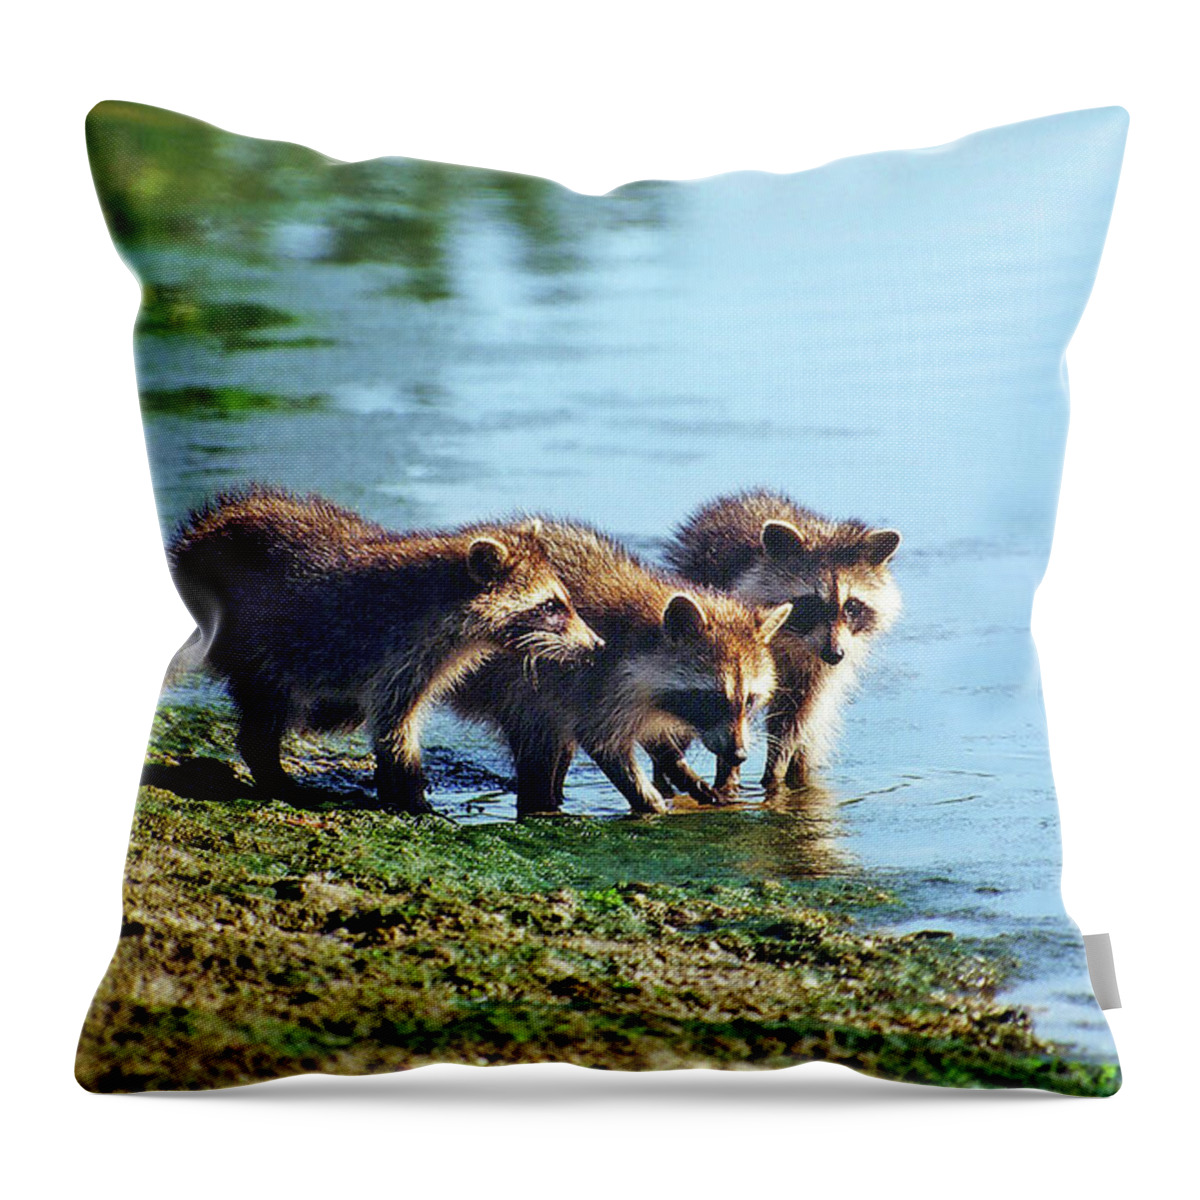 Raccoon Throw Pillow featuring the photograph Young Raccoons by Ted Keller